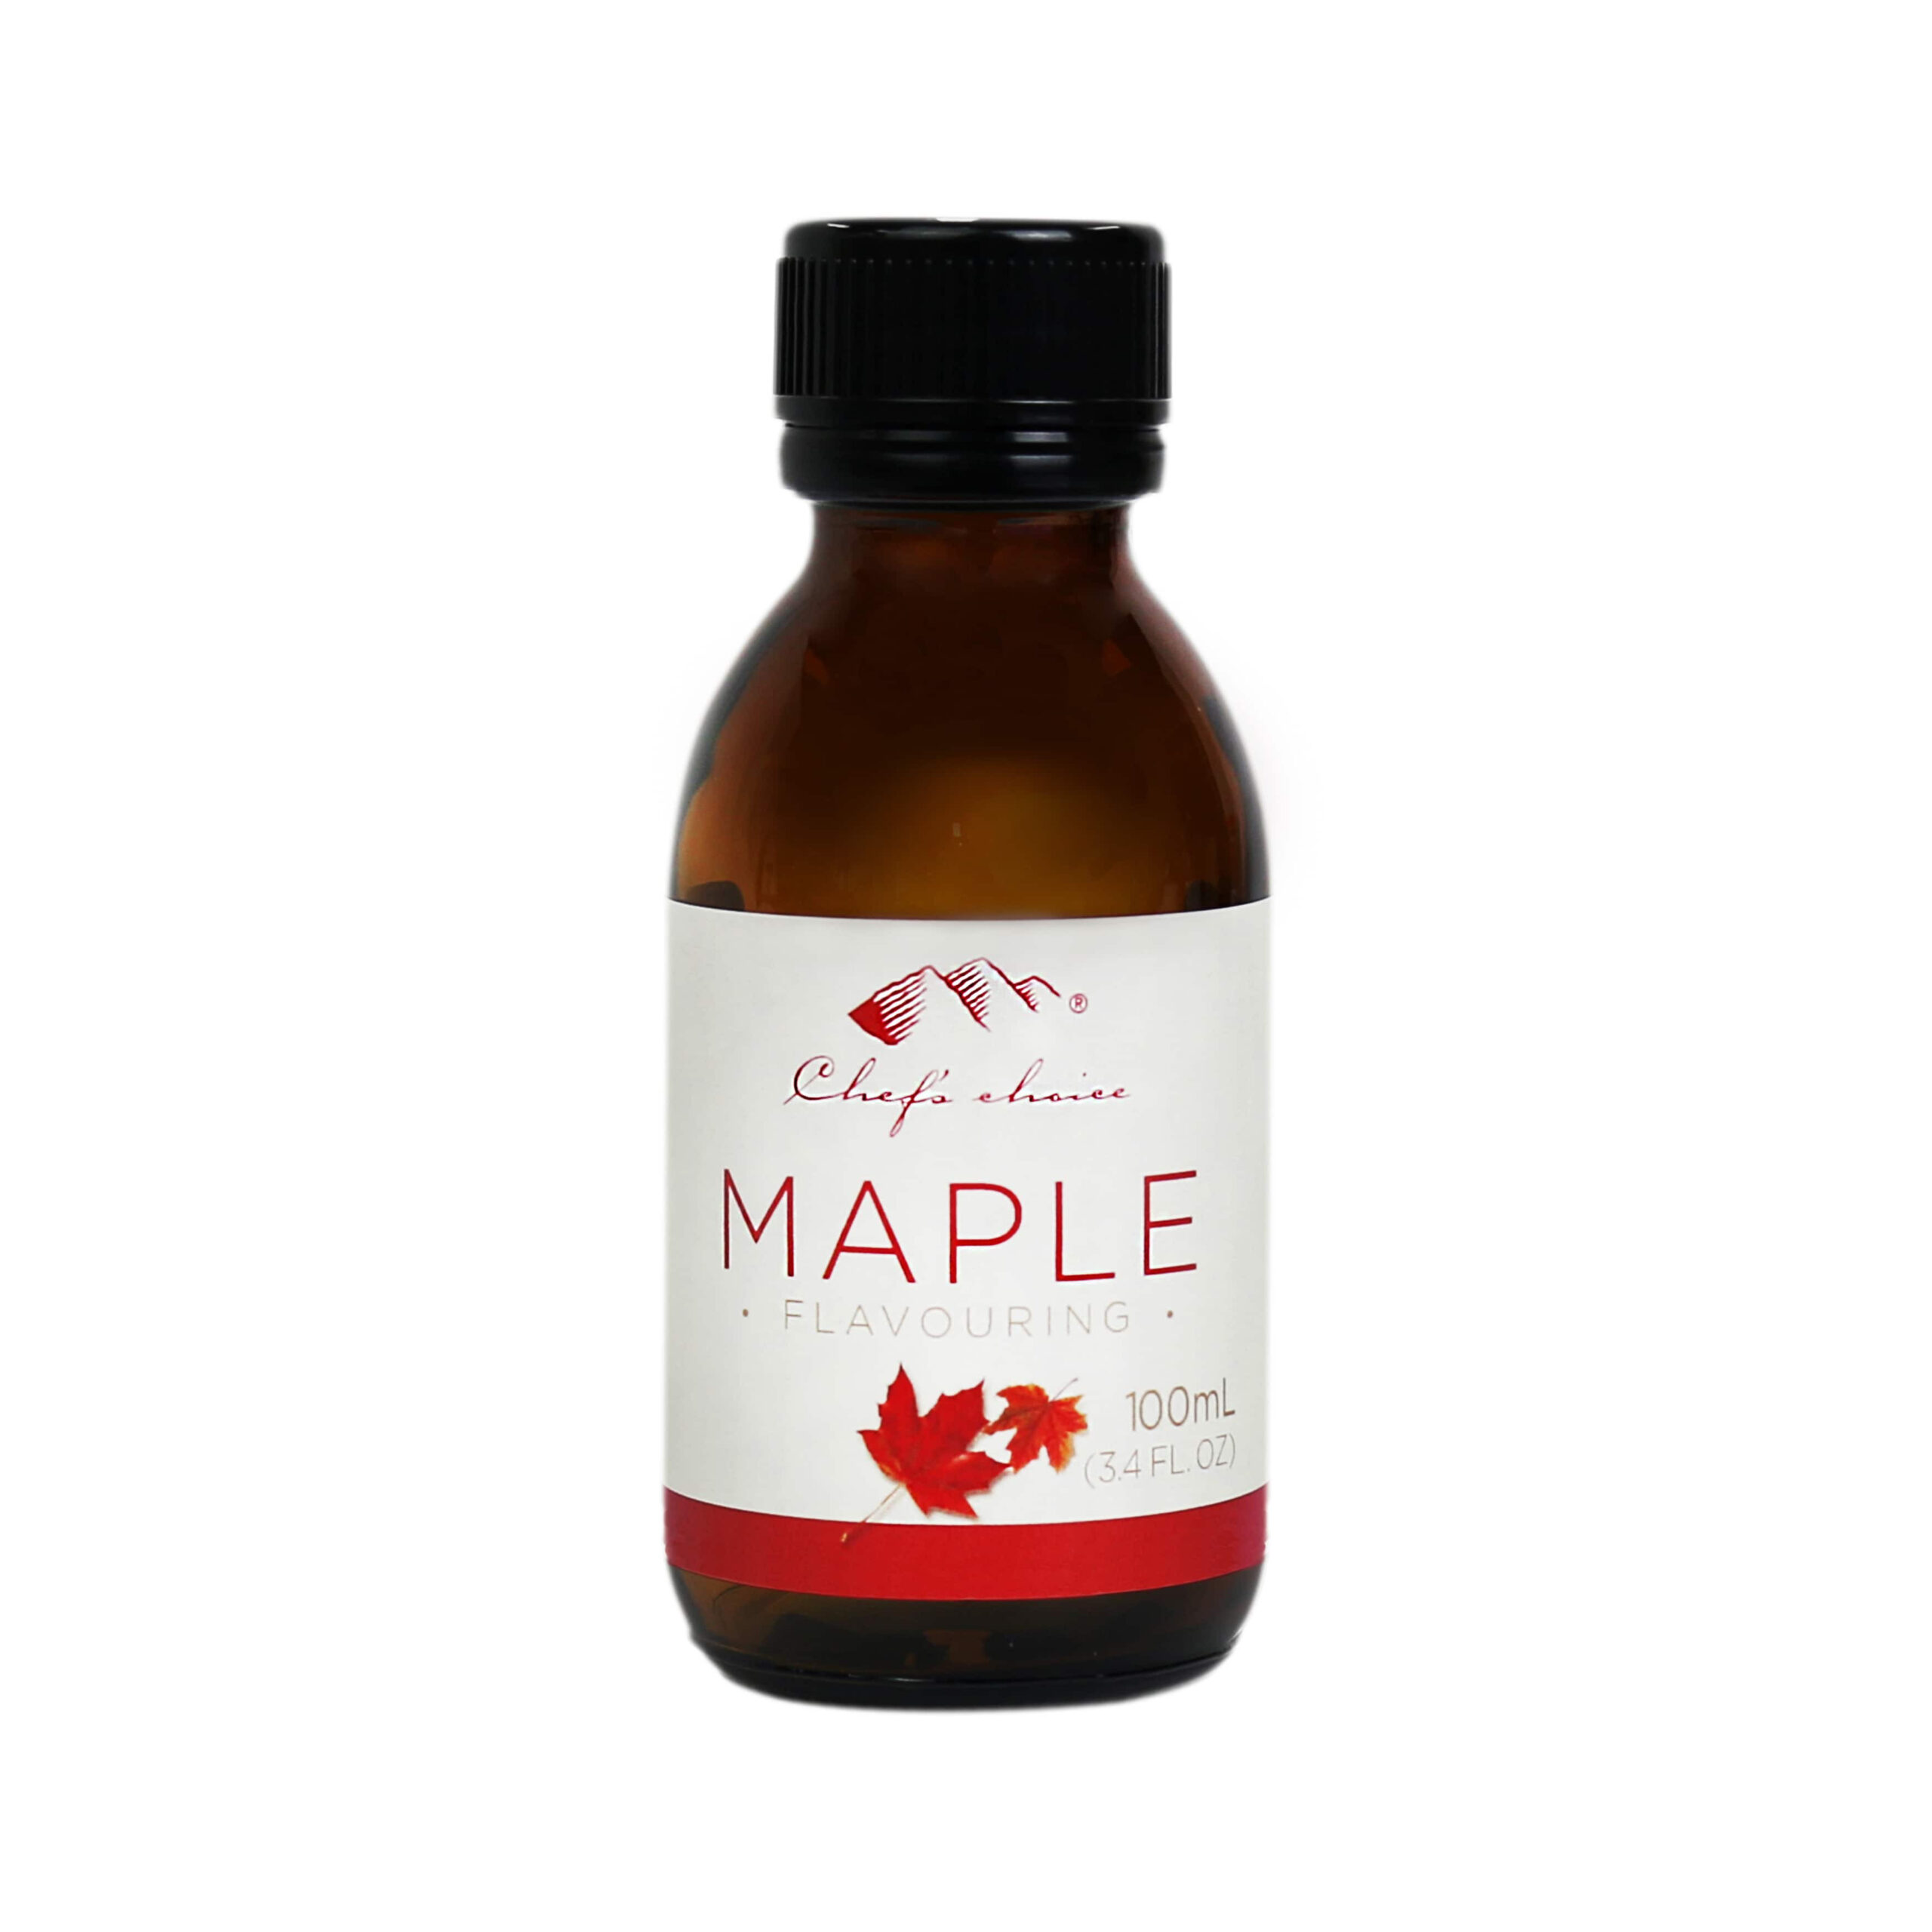 Chef's Choice Maple Flavouring